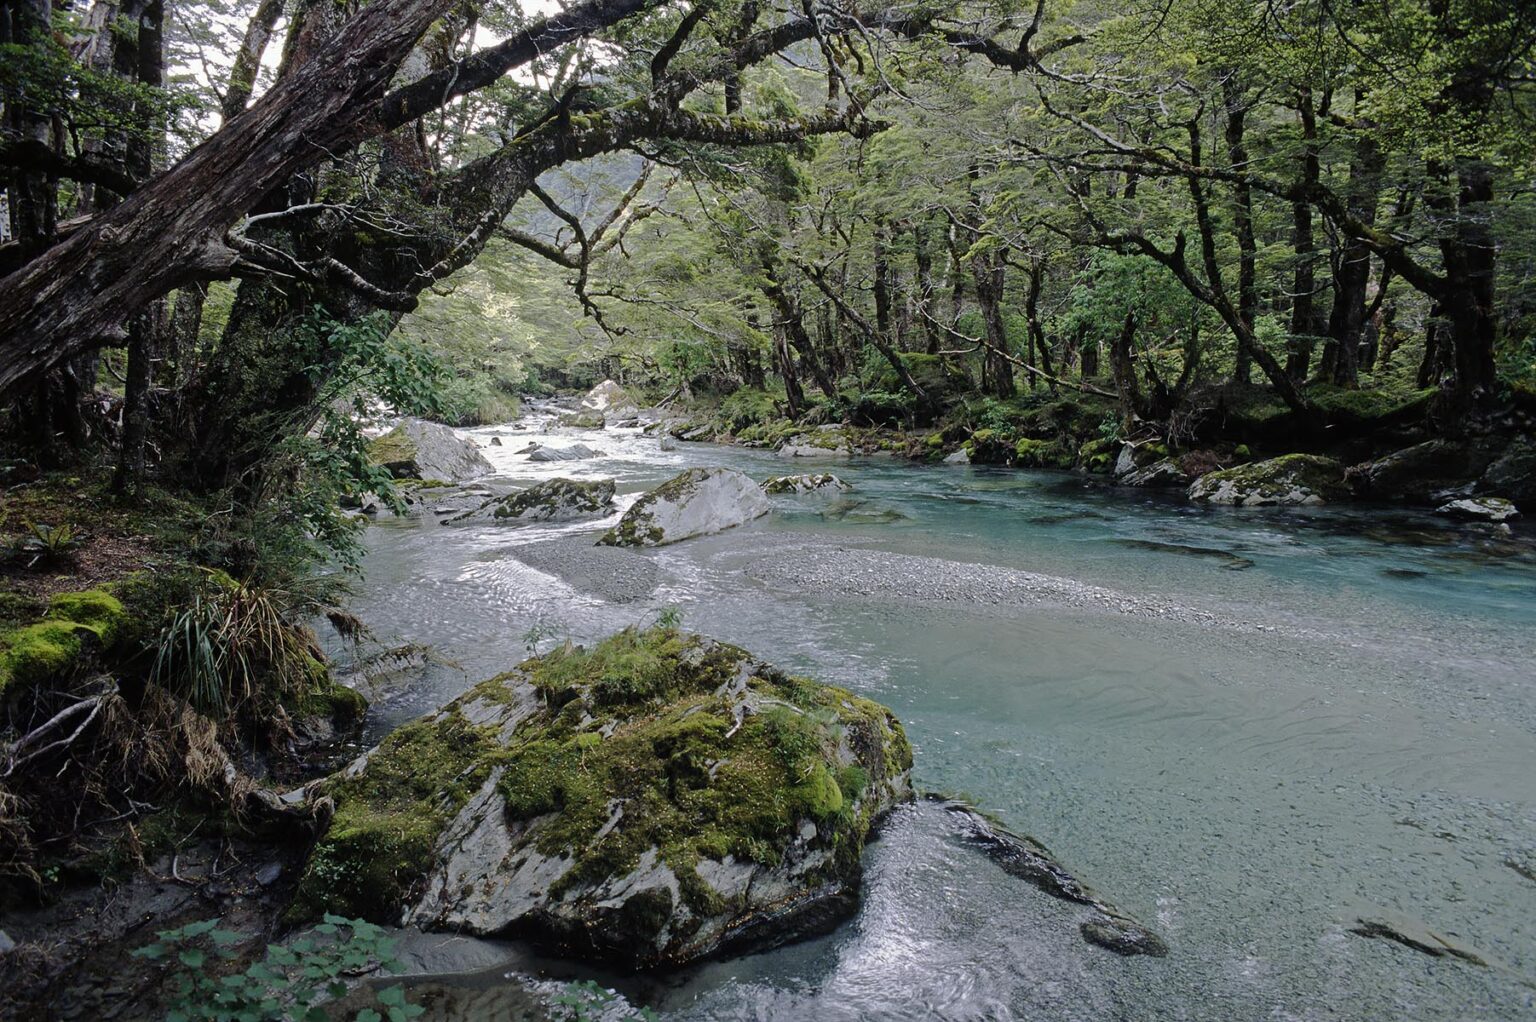 The ROUTEBURN RIVER winds through the BEECH FOREST in MT ASPIRING NATIONAL PARK - SOUTH ISLAND, NEW ZEALAND